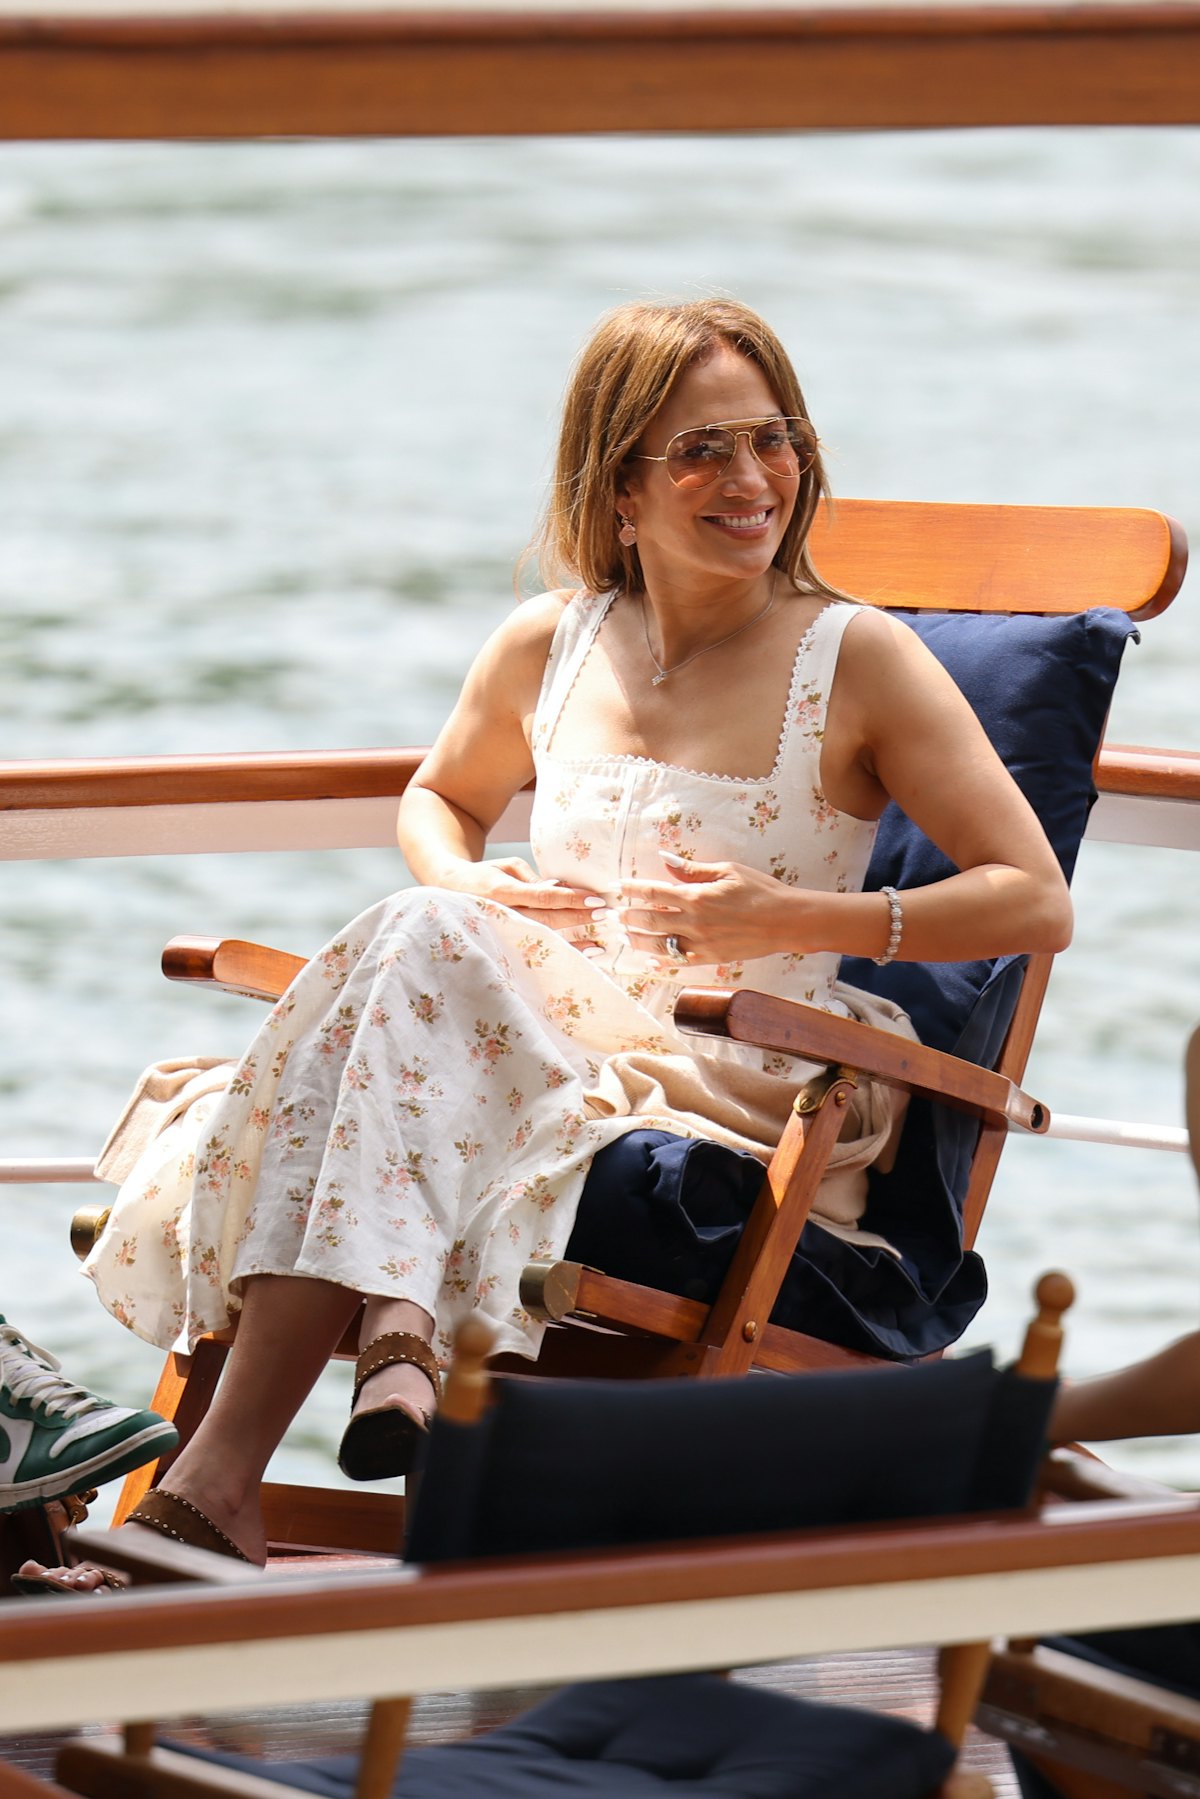 Jennifer Lopez and Ben Affleck (not pictured) take a cruise on the River Seine on July 23, 2022 in P...